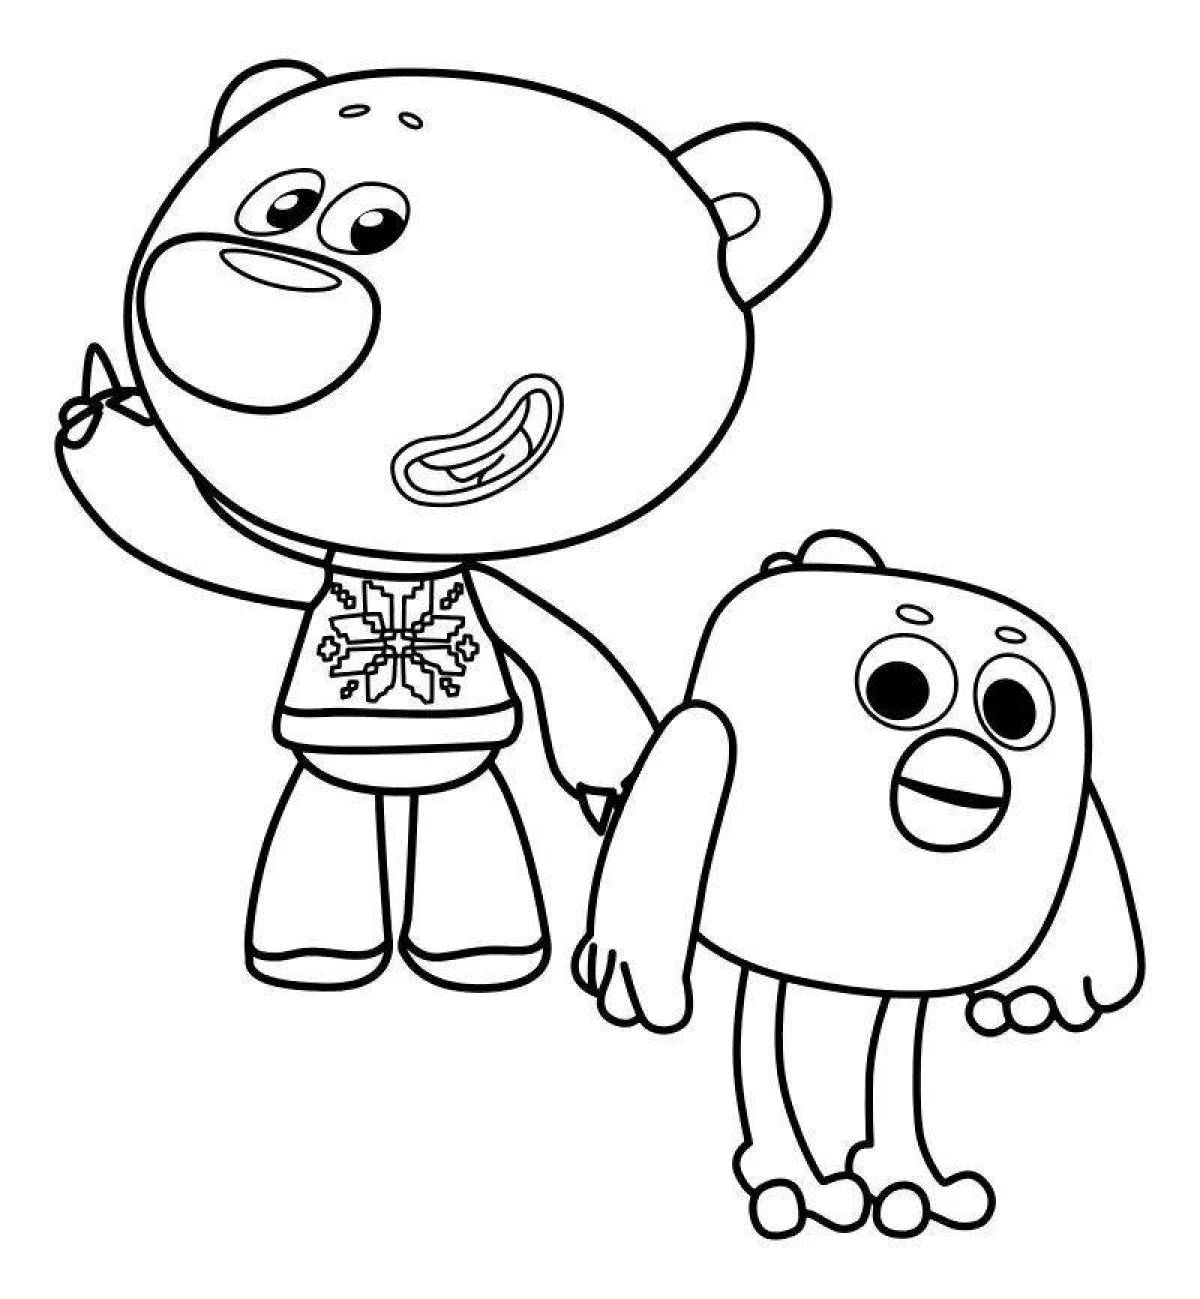 Glittering bears on the sea coloring page